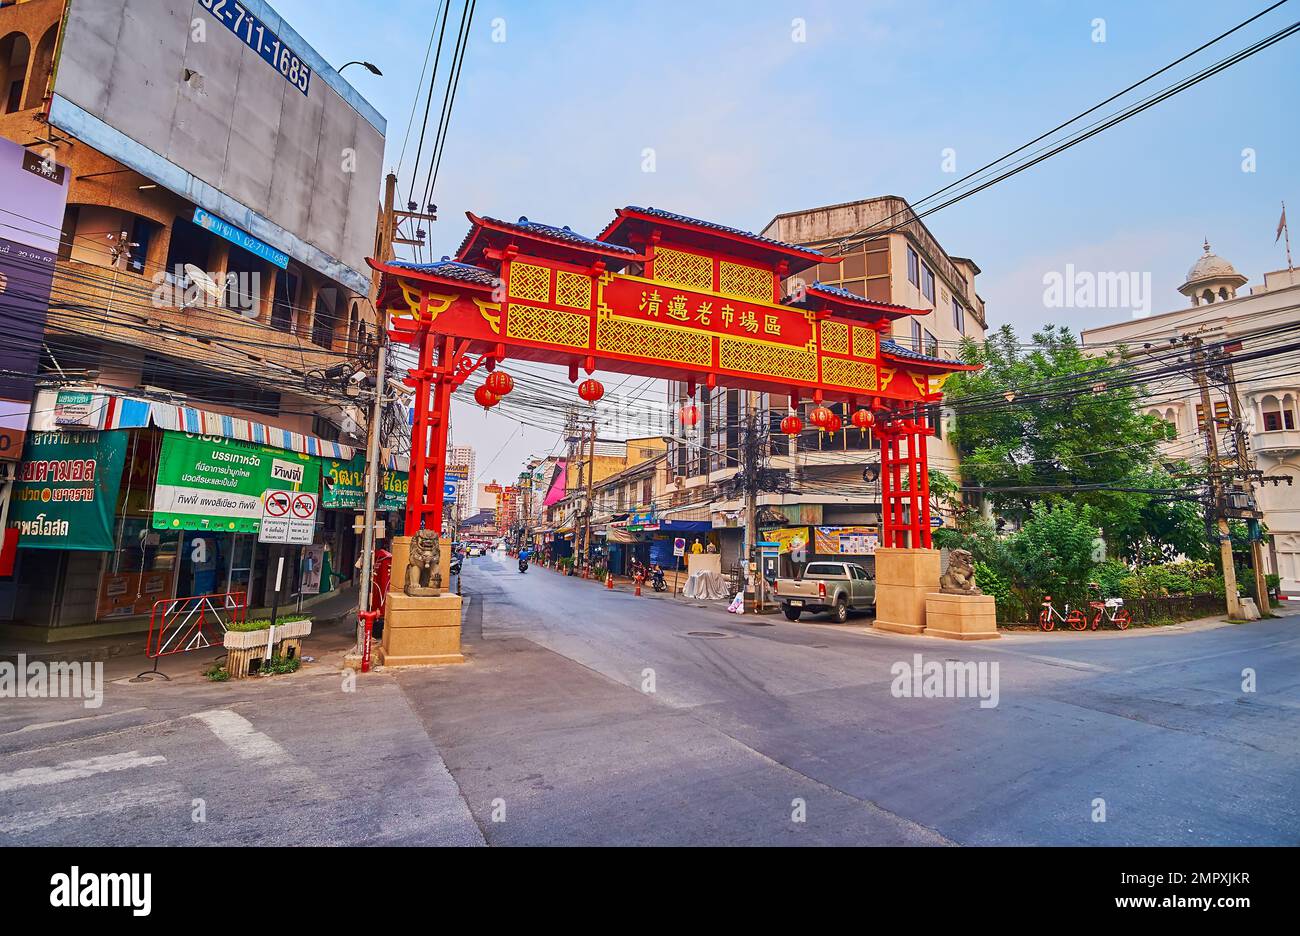 CHIANG MAI, THAILAND - MAY 3, 2019: The red Chinese Welcome Gate, decorated with gilt inscription, patterns and lanterns, located at the entrance to t Stock Photo